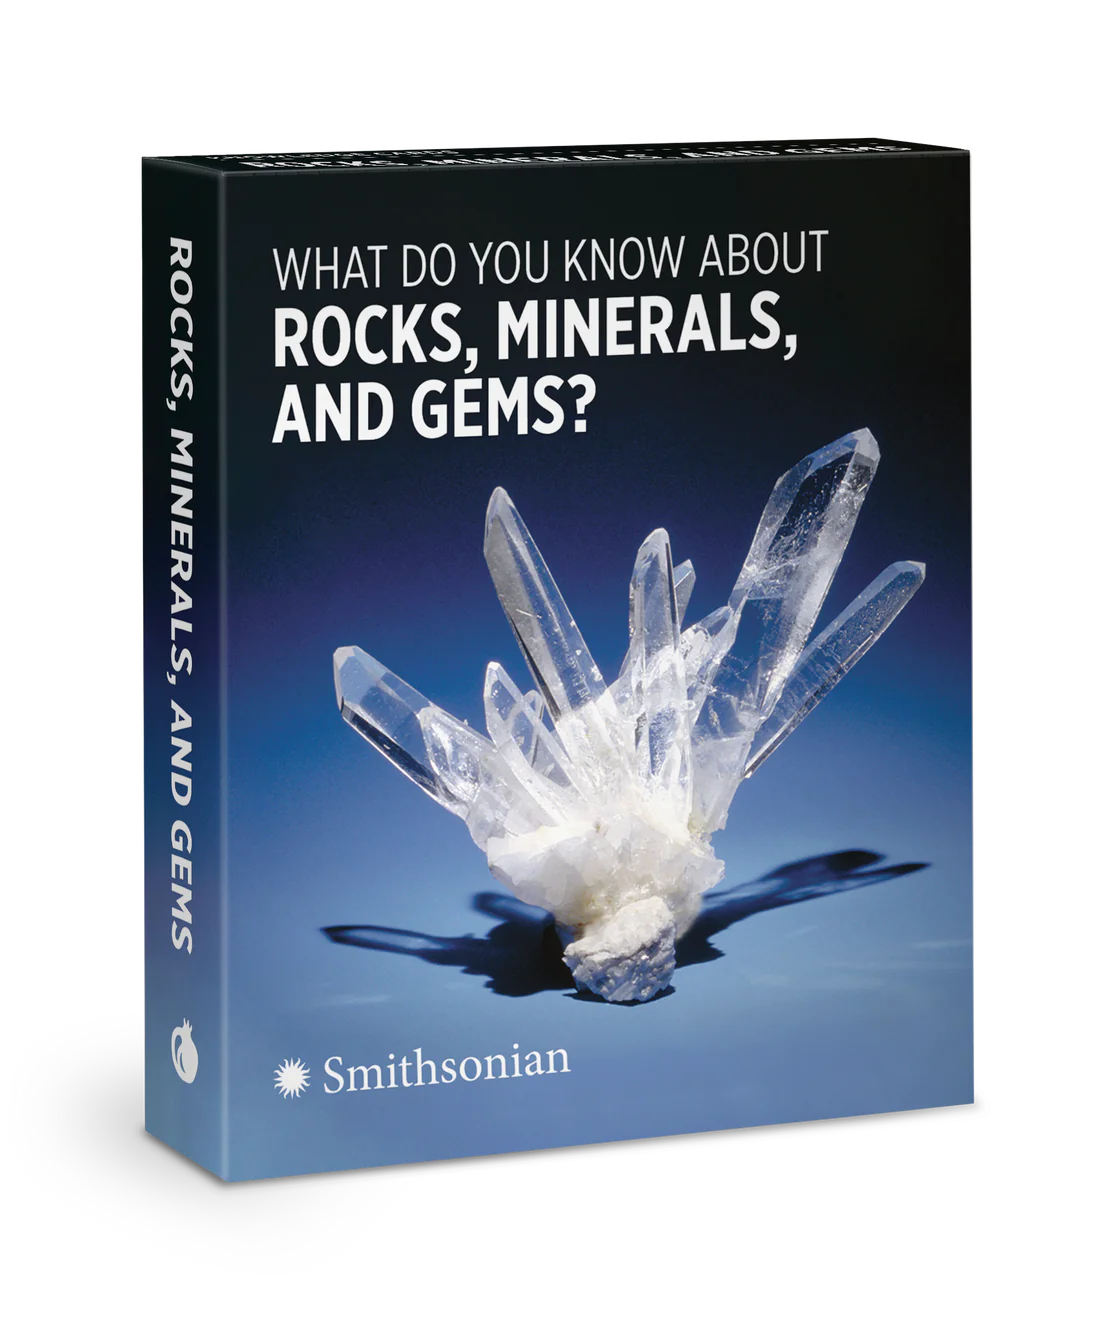 What Do You Know About Rocks, Minerals, and Gems? Knowledge Cards